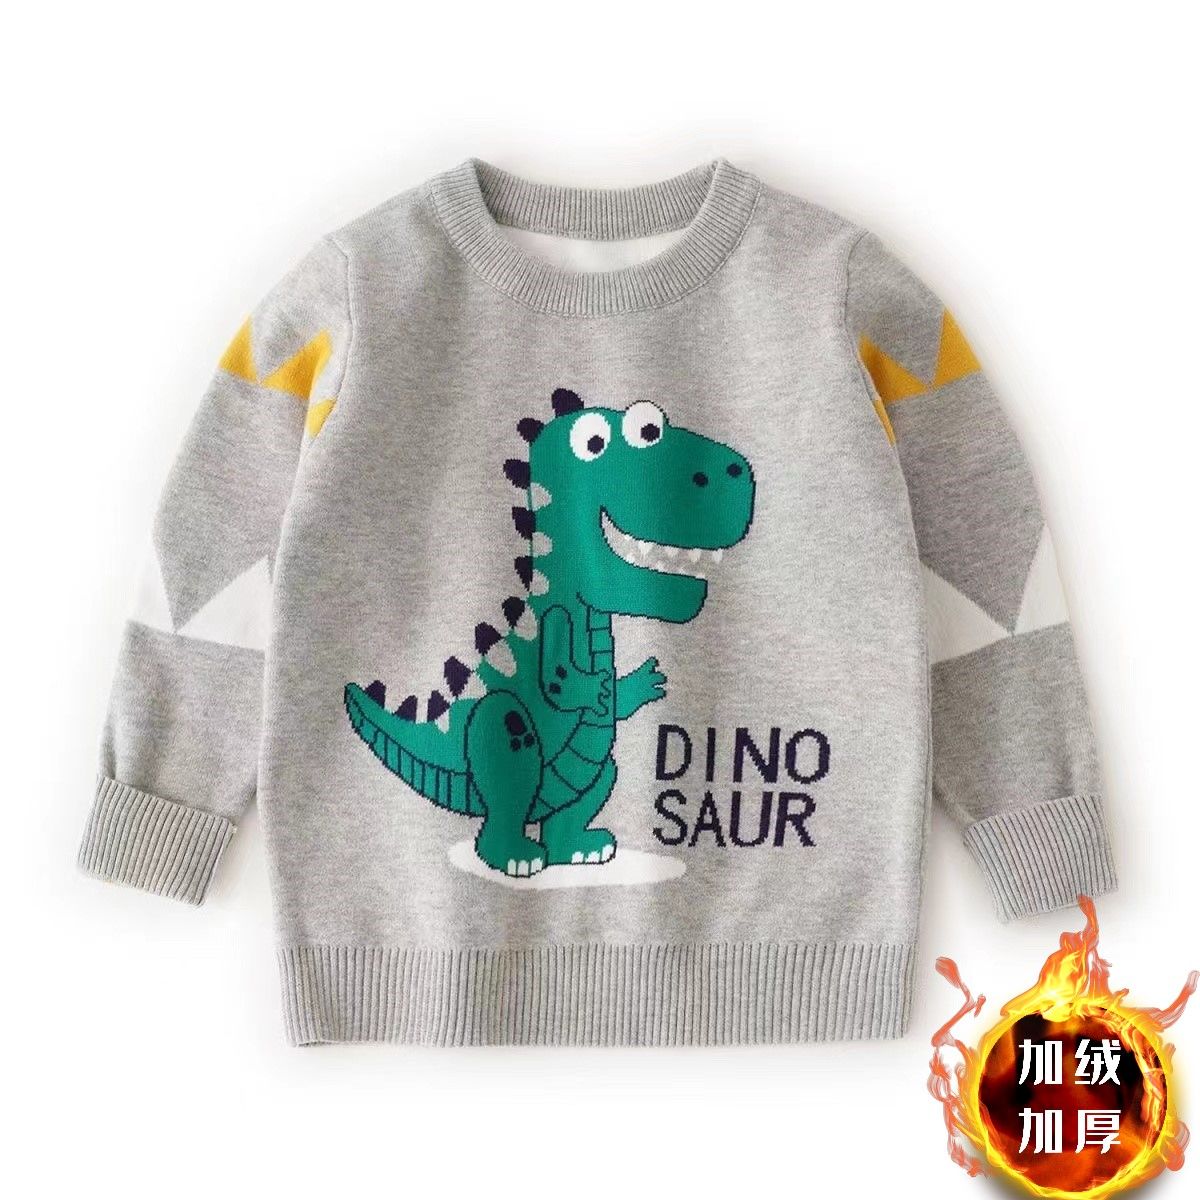 Xinmi children's clothing autumn and winter boys pure cotton plus velvet thick sweater saber-toothed dinosaur cartoon baby children's pullover sweater